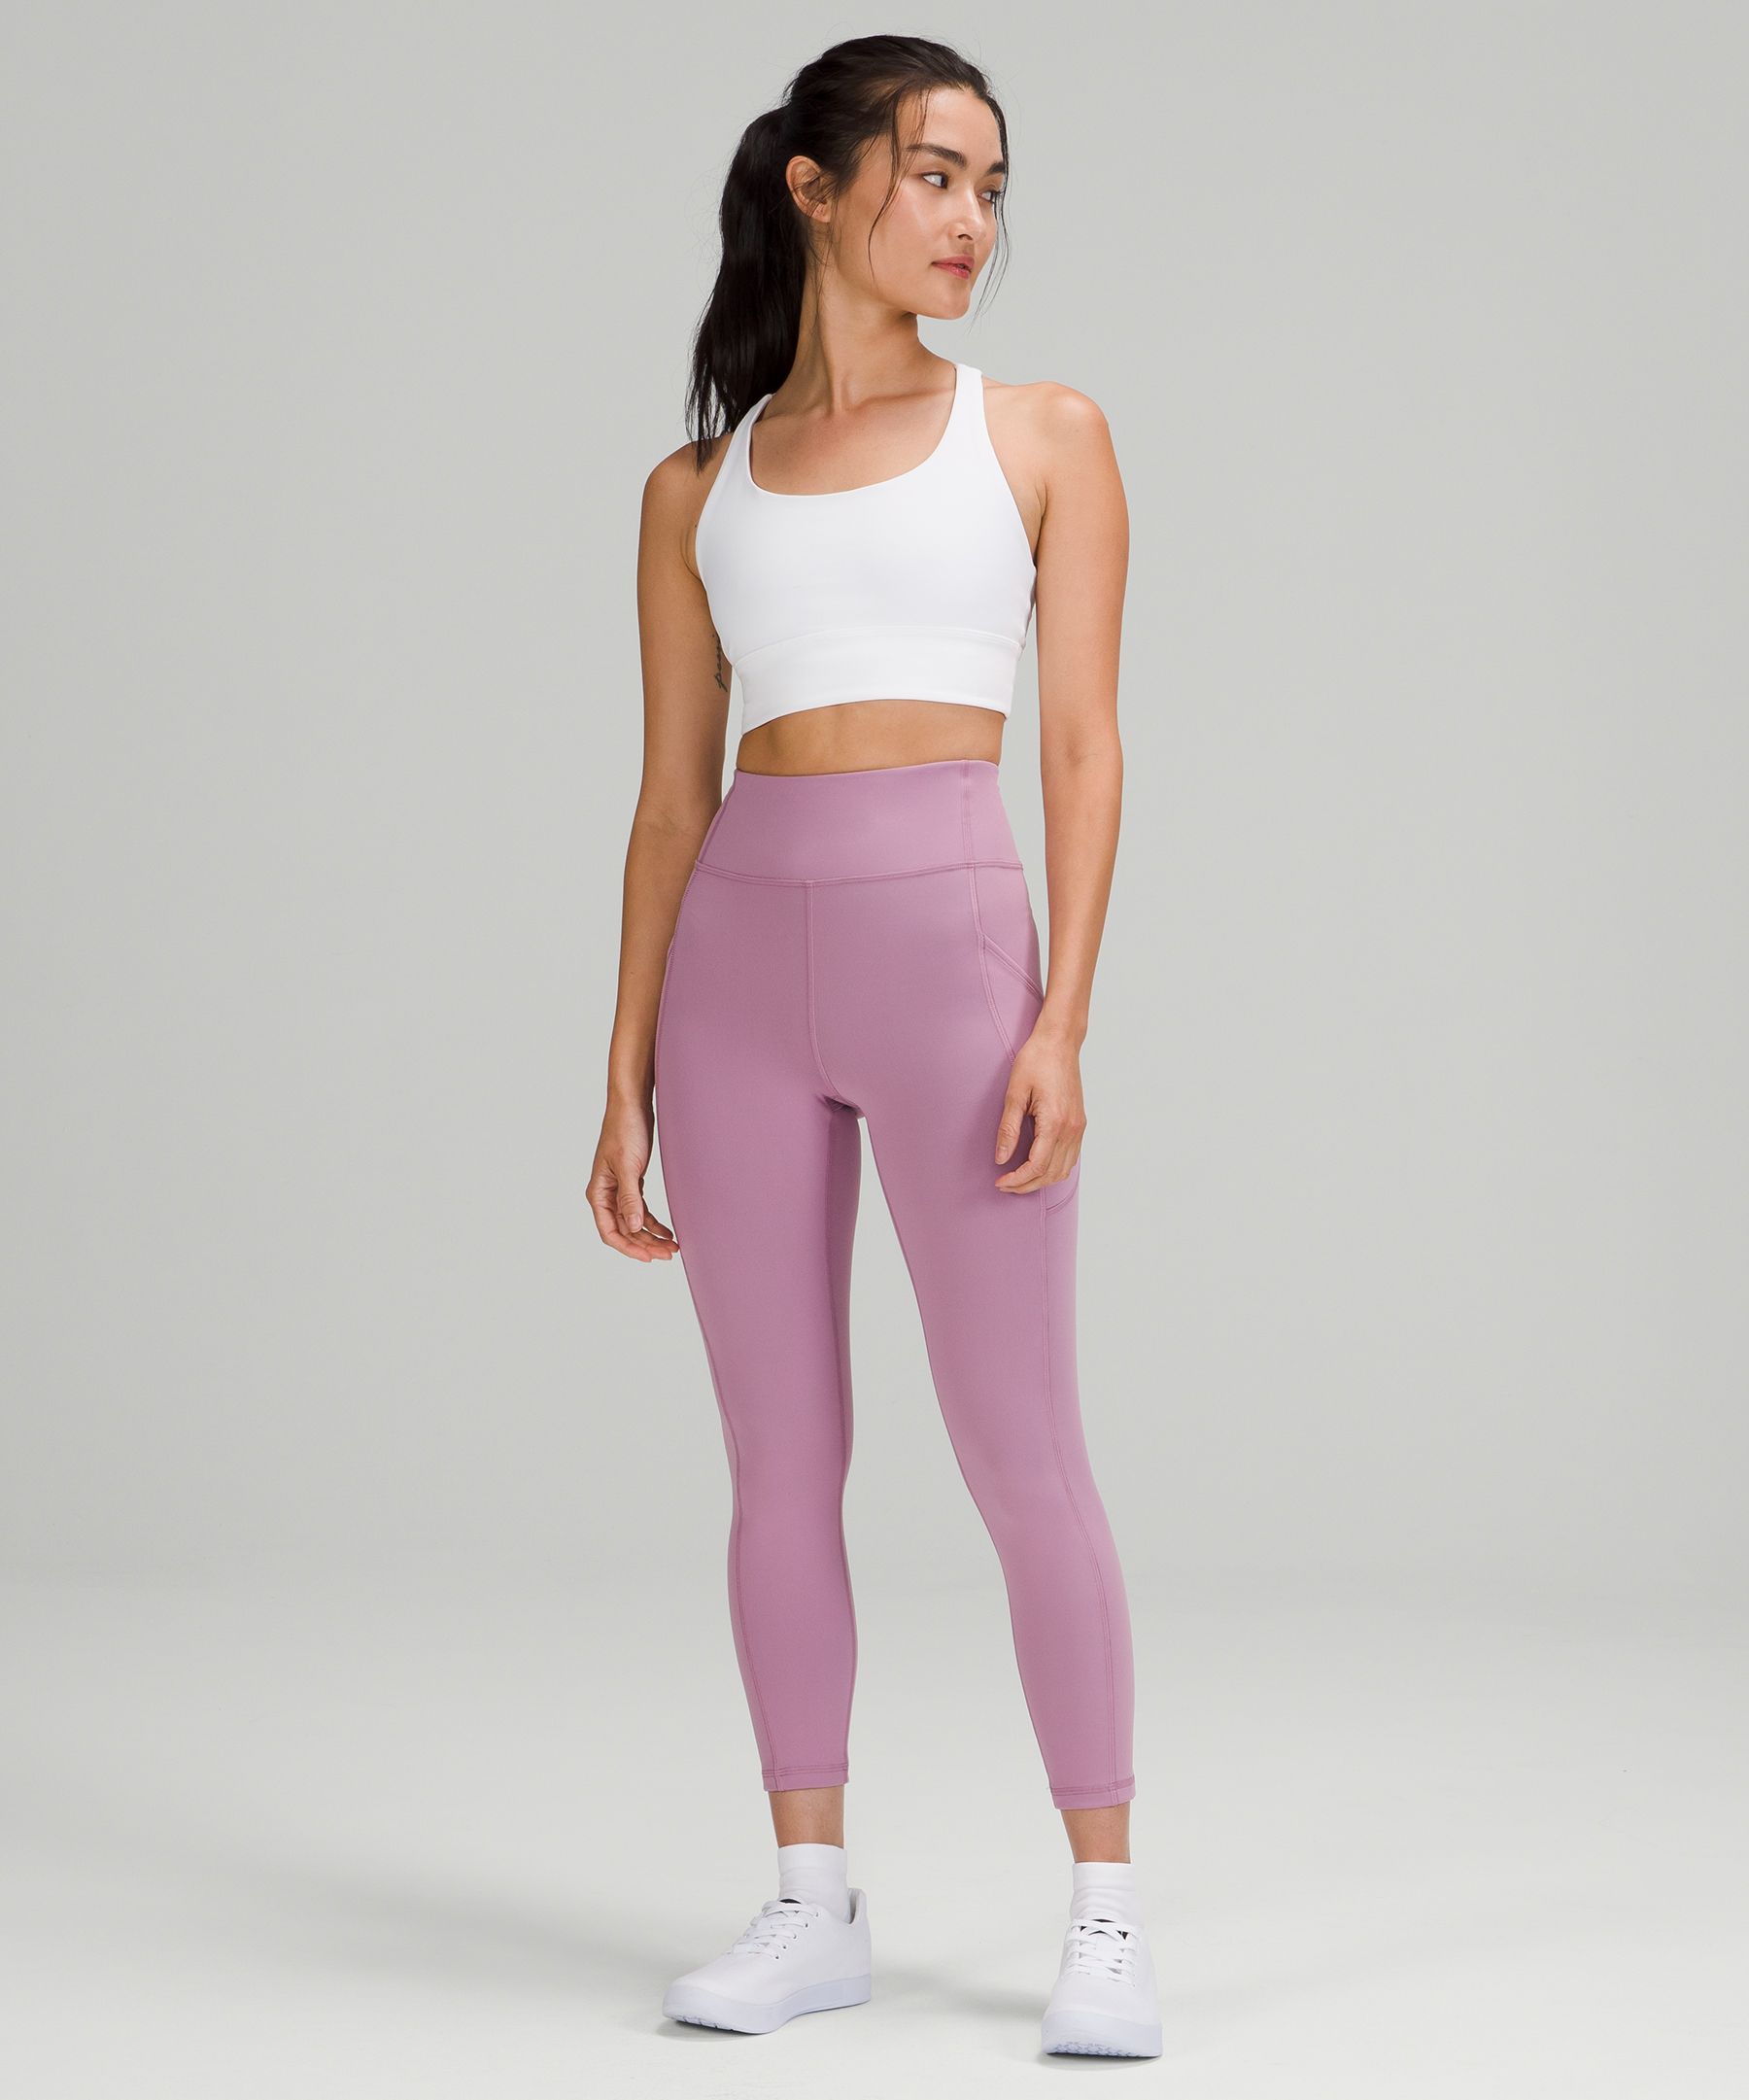 Shopping the wundermost collection and noticed disparity in sizing : r/ lululemon